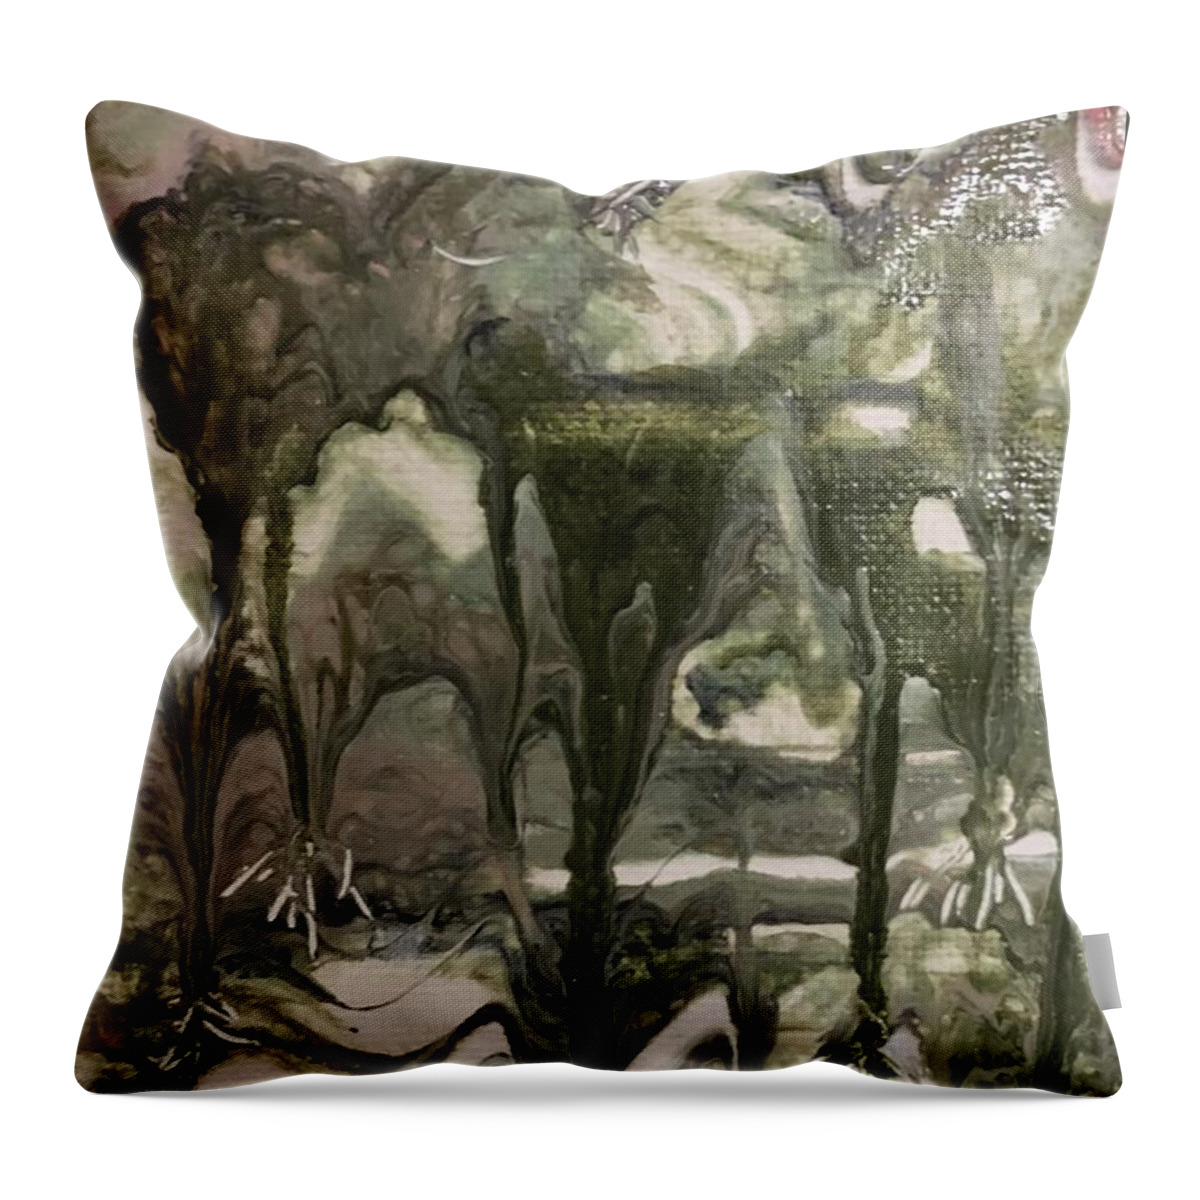 Swamps Throw Pillow featuring the painting The Swamp by Lessandra Grimley